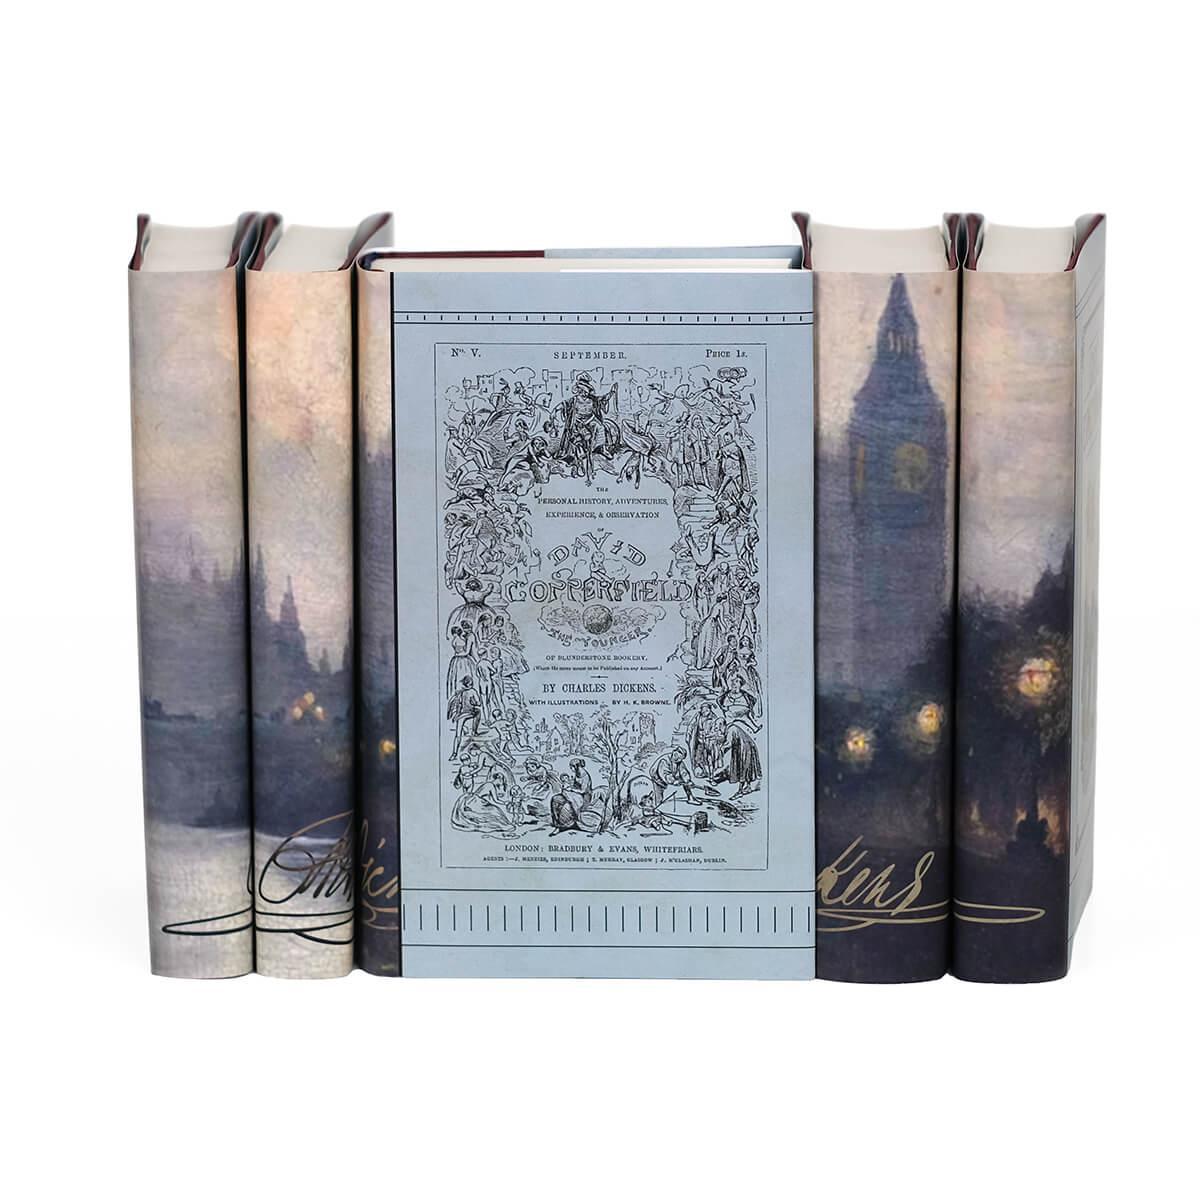 David Copperfield illustrated light blue cover facing forward surrounded by other four books in the series depicting Dickensian London scene on their spines 